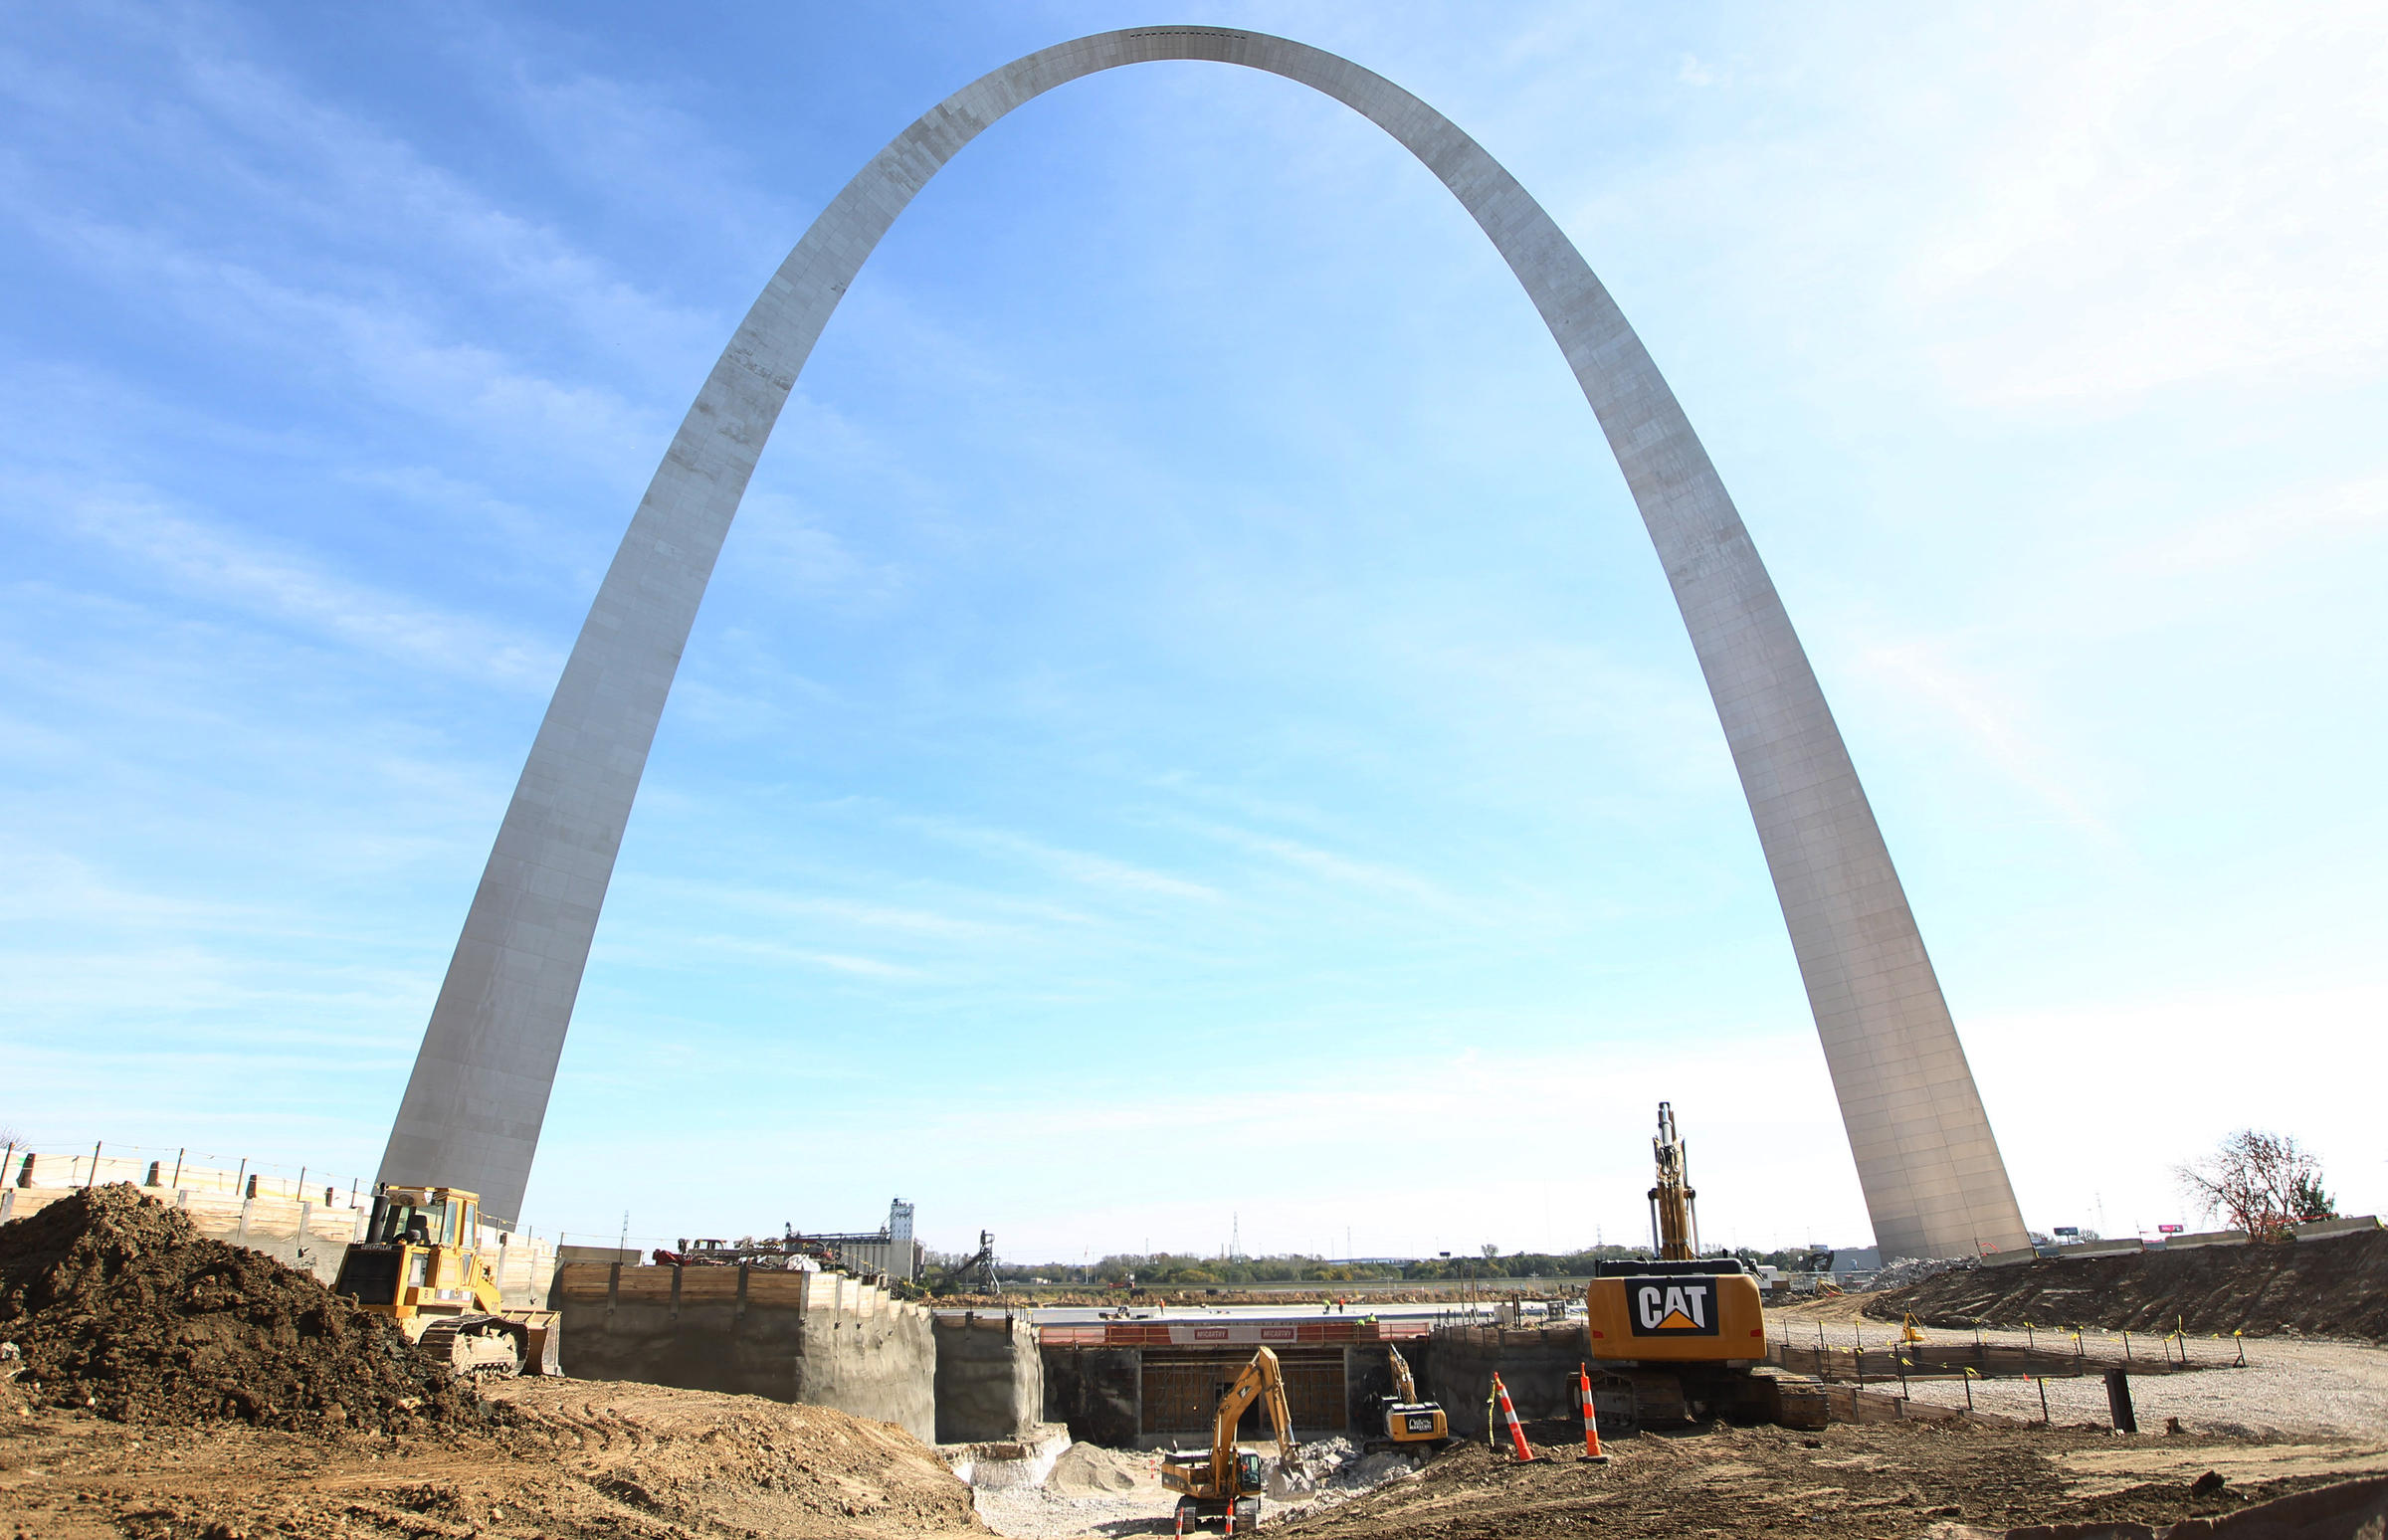 As Gateway Arch Turns 50, Its Message Gets Reframed | KCUR